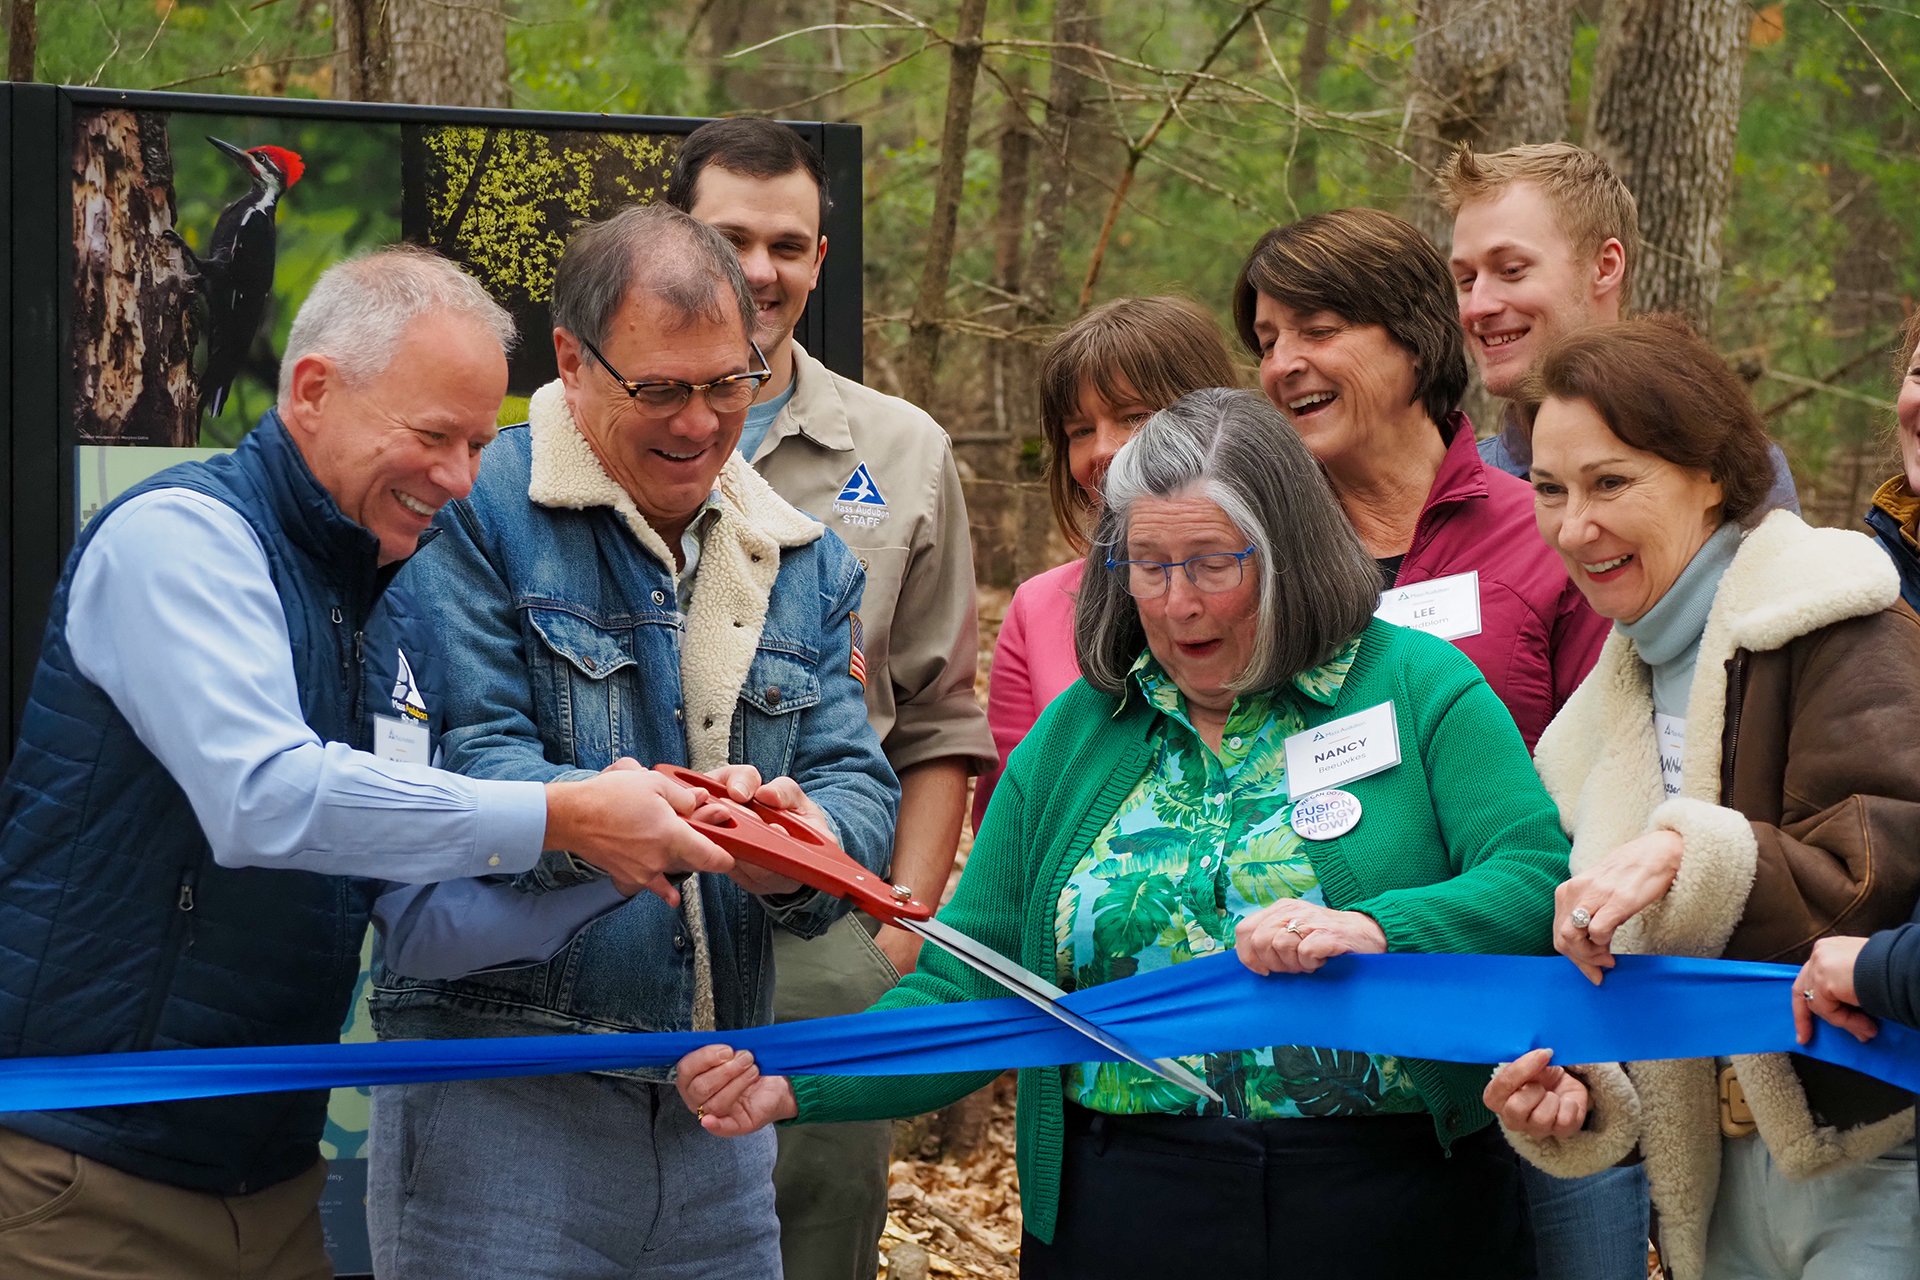 David O'Neill and guests cutting a blue ribbon at Brewster's Woods